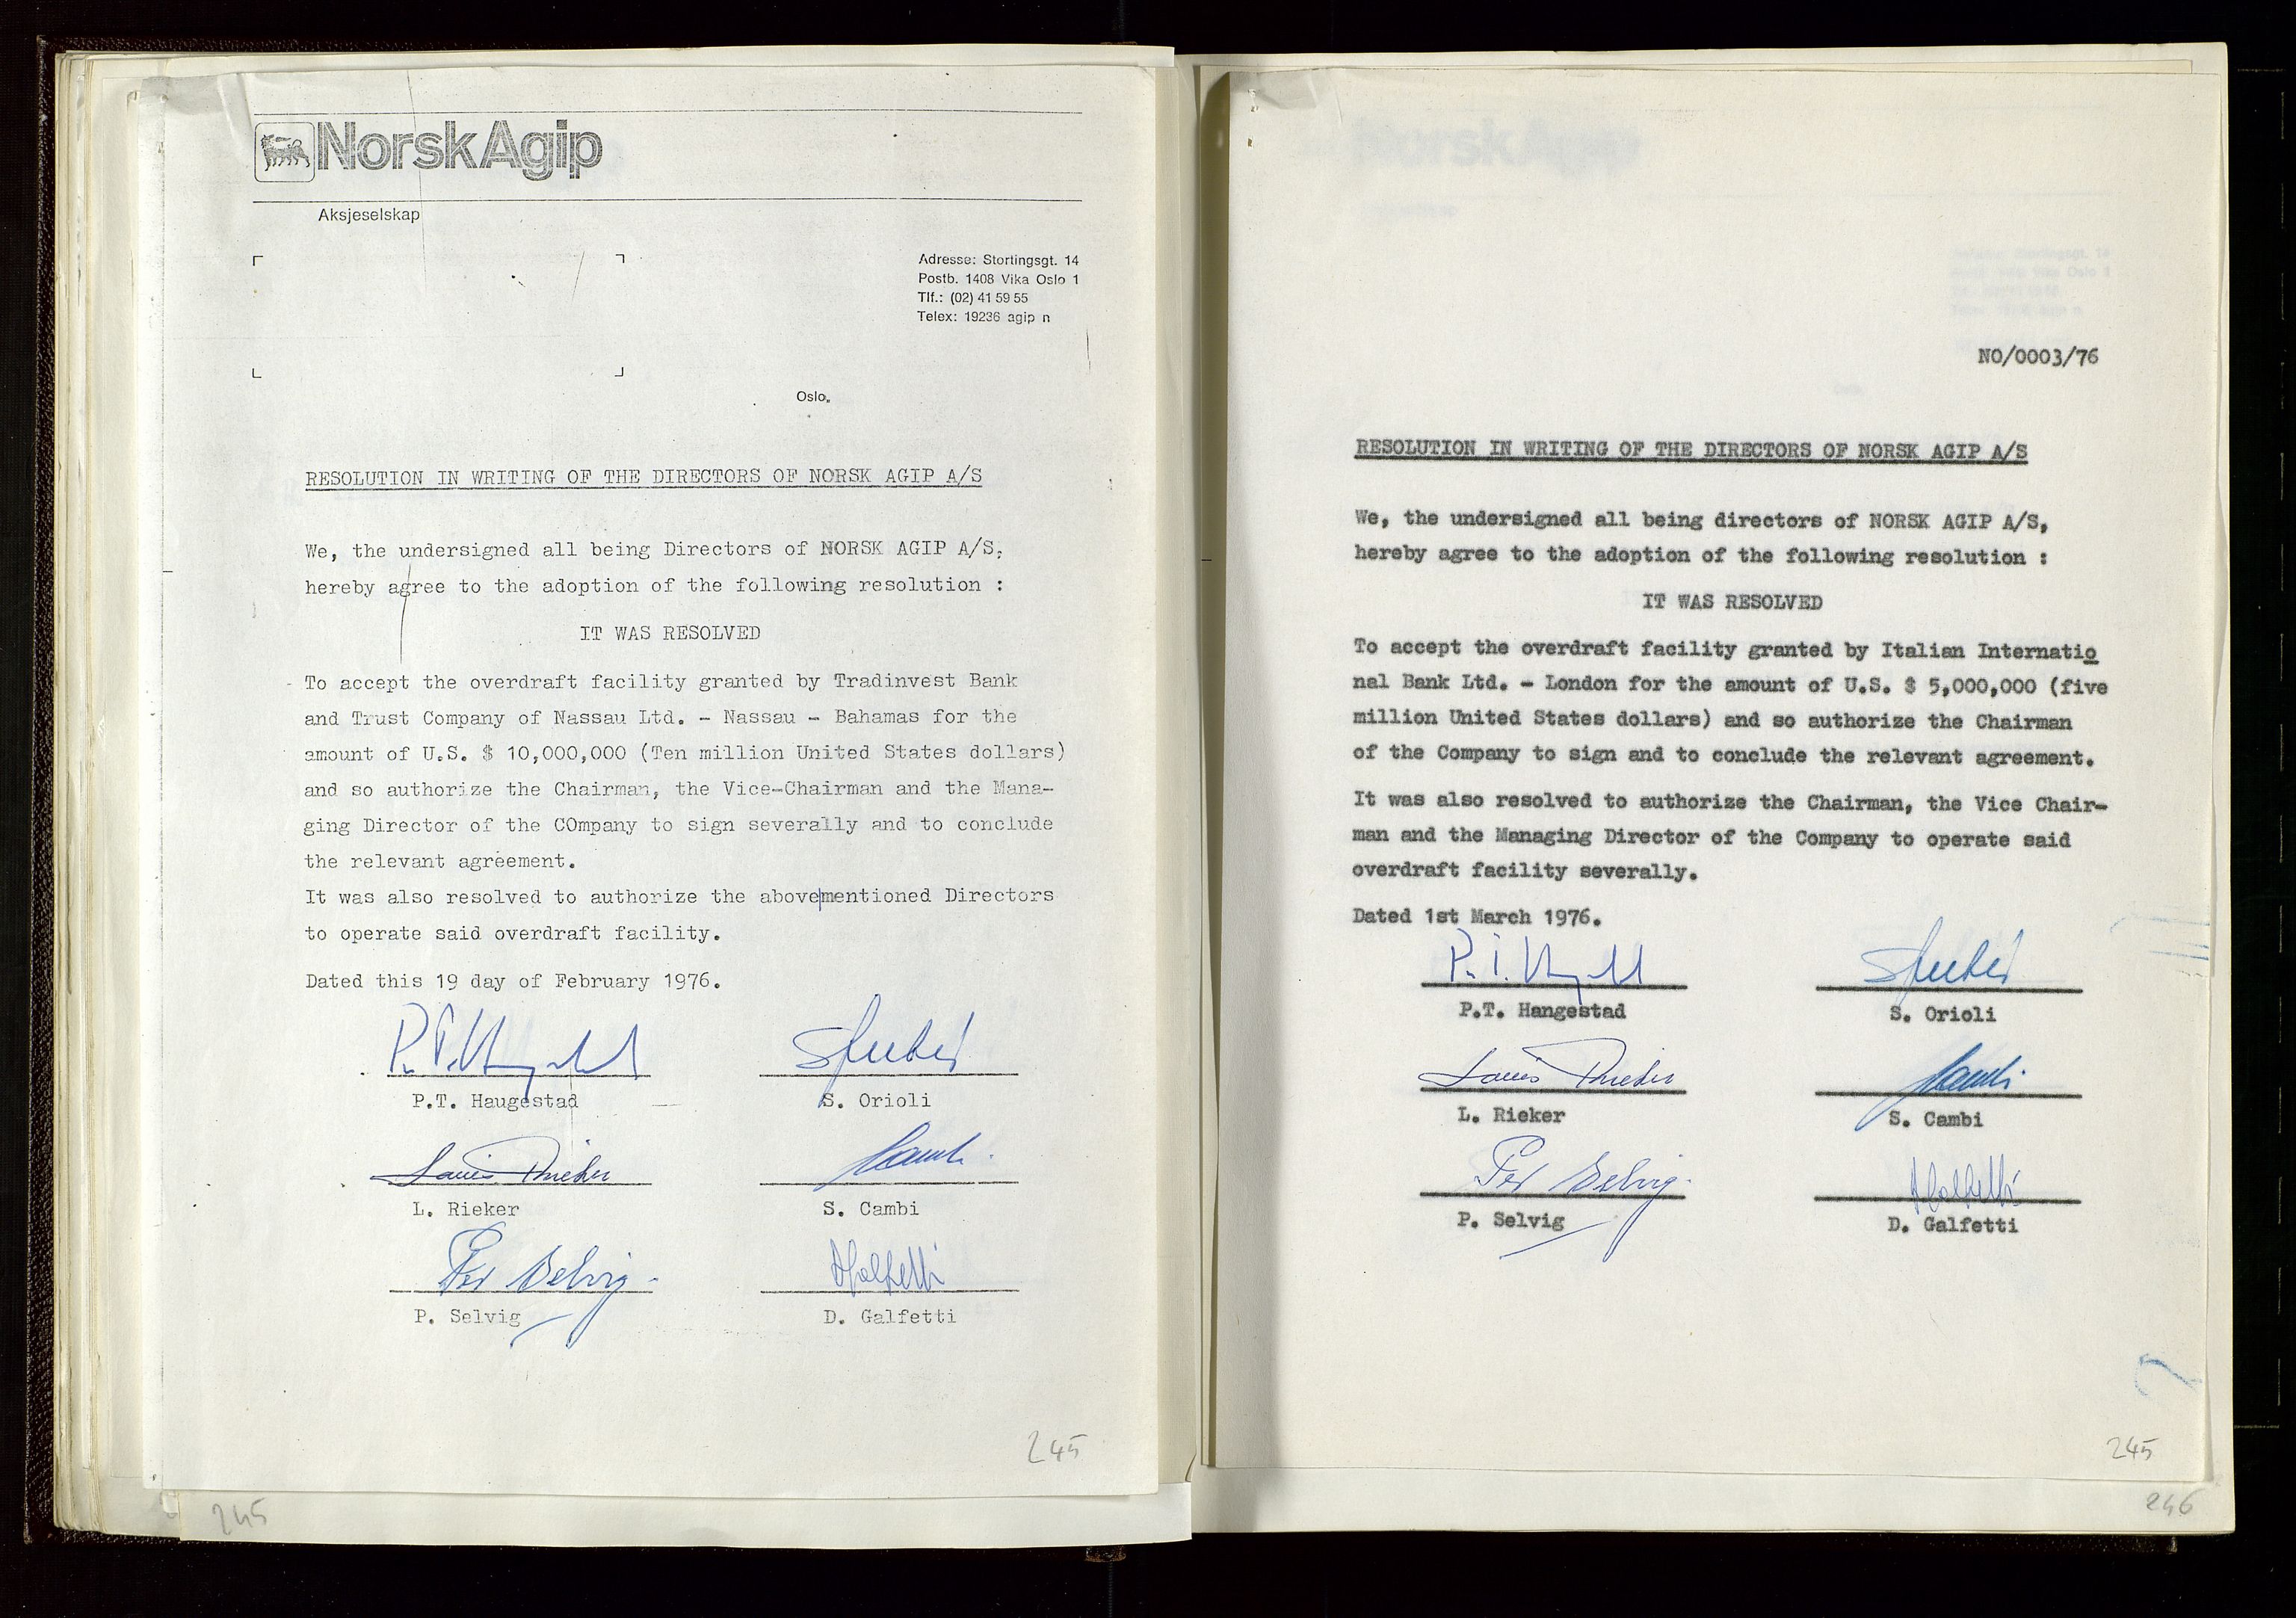 Pa 1583 - Norsk Agip AS, SAST/A-102138/A/Aa/L0002: General assembly and Board of Directors meeting minutes, 1972-1979, s. 245-246